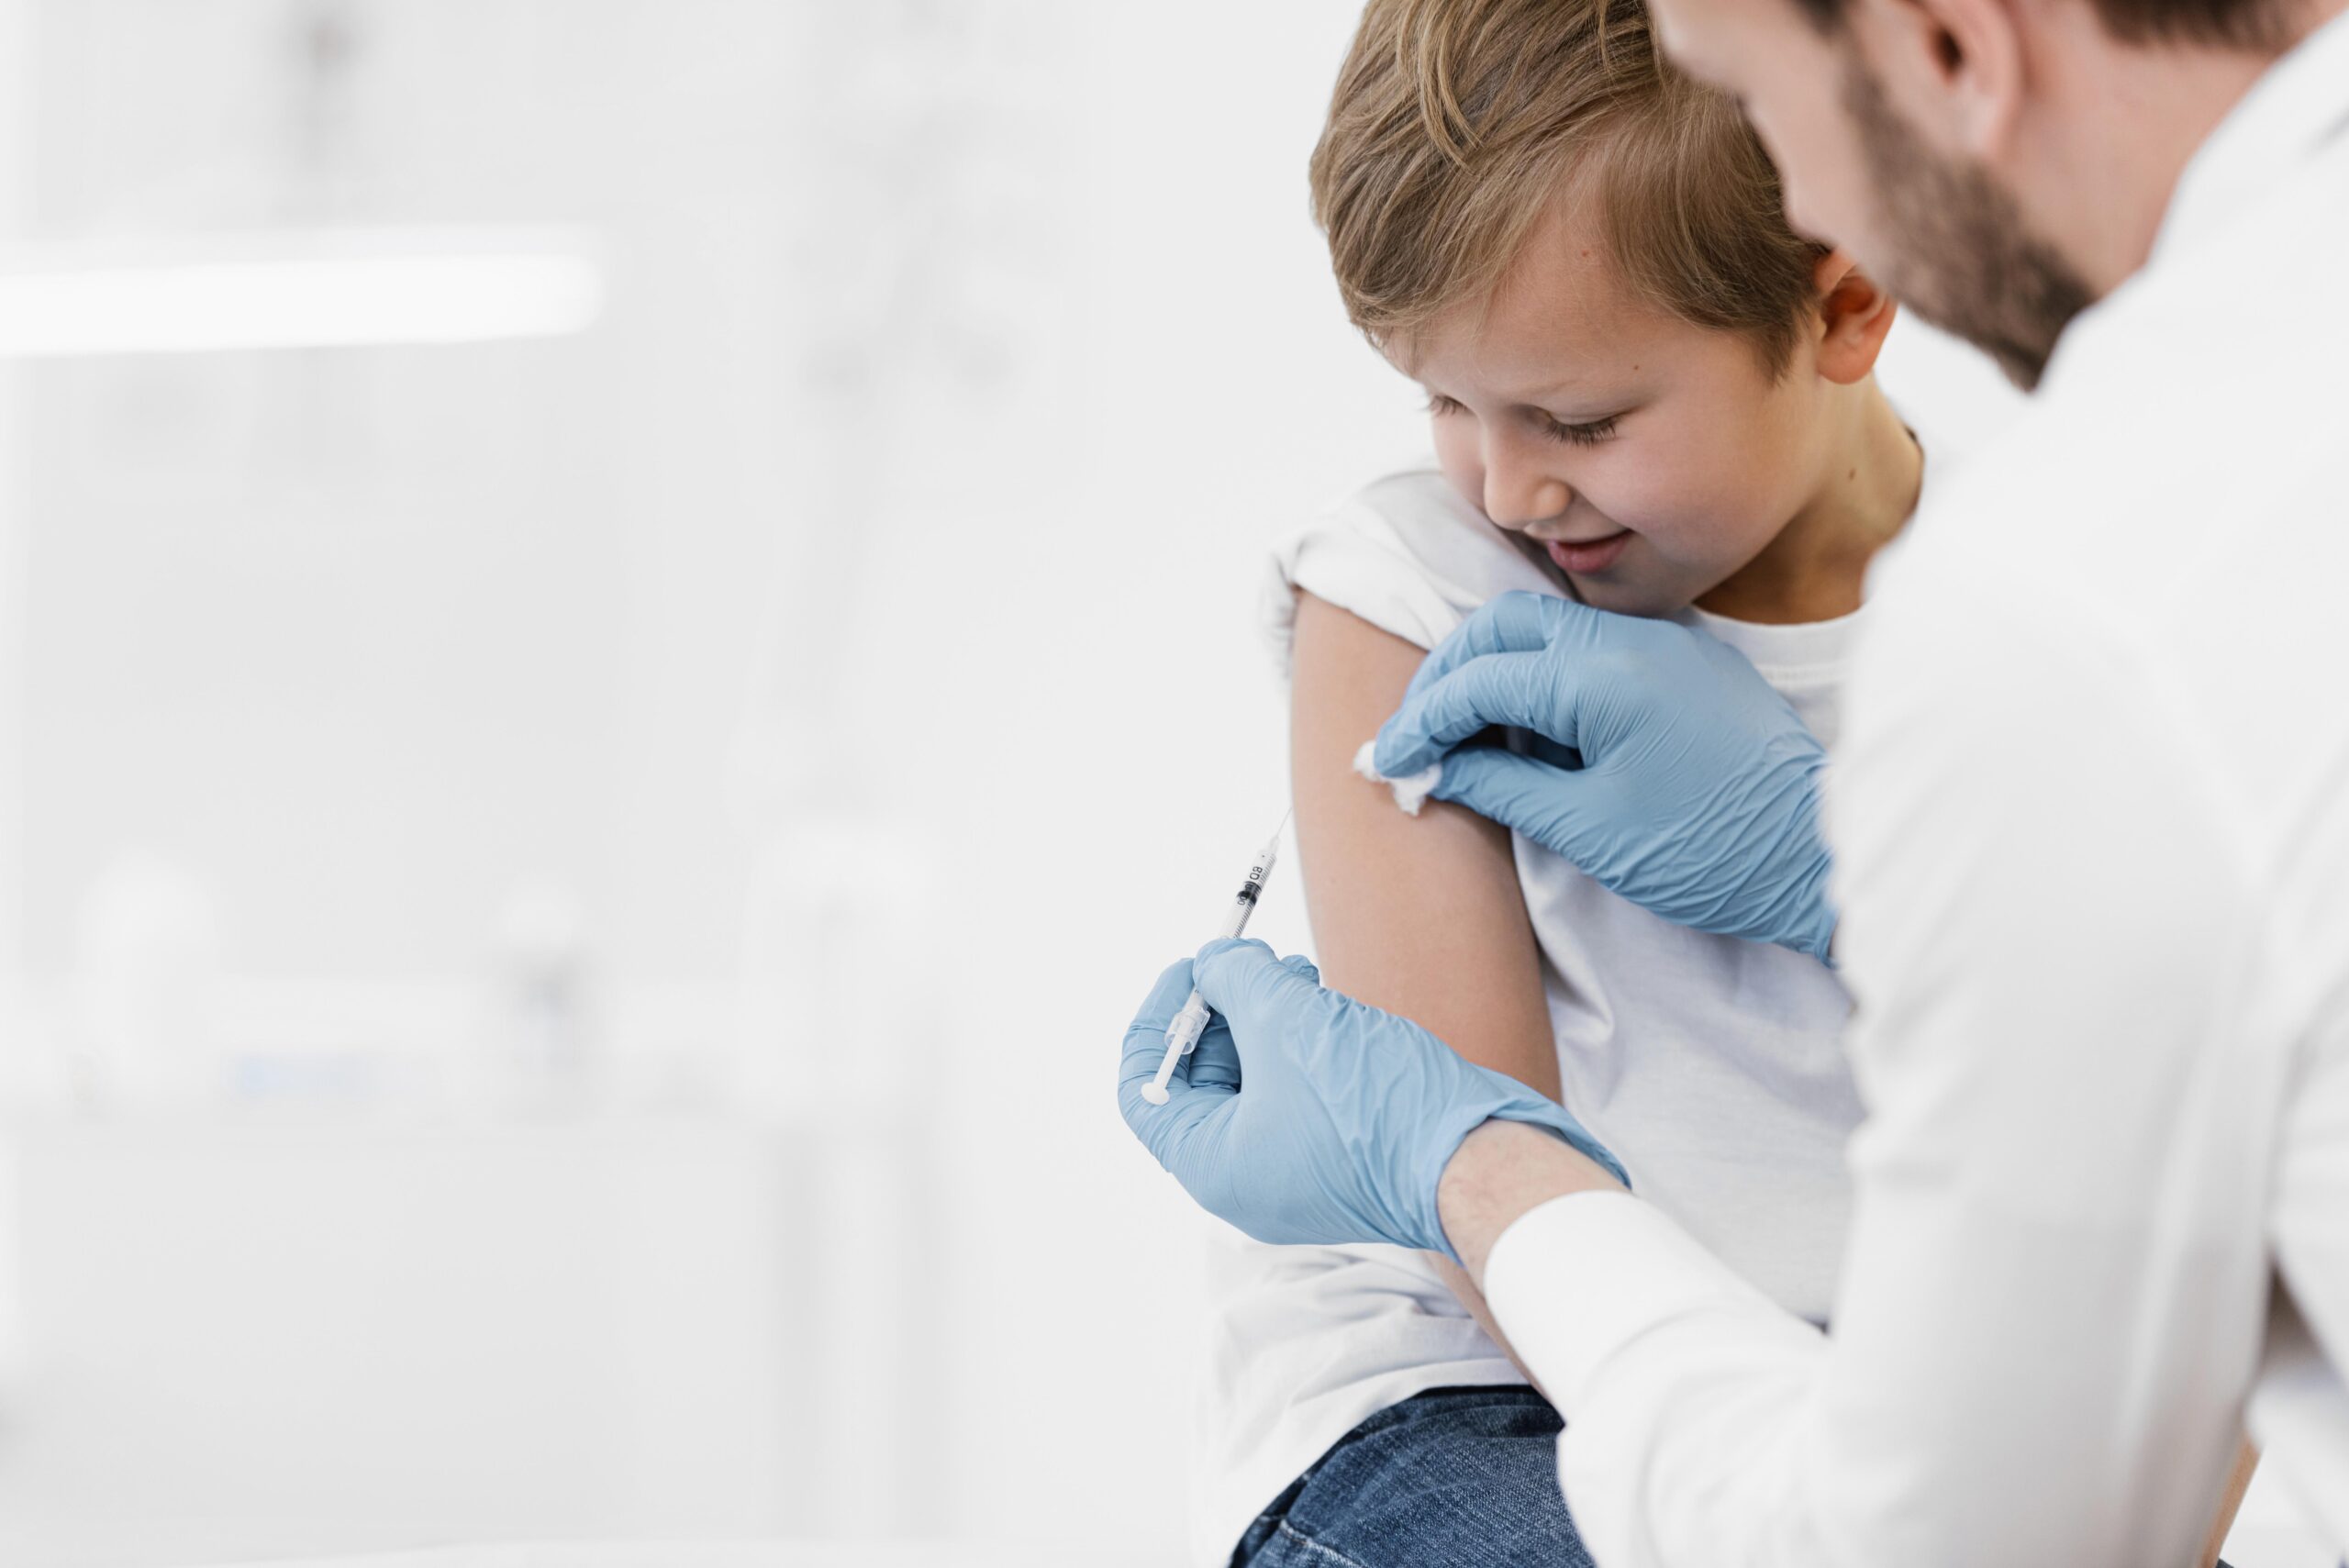 What Is Chickenpox?: Learn More